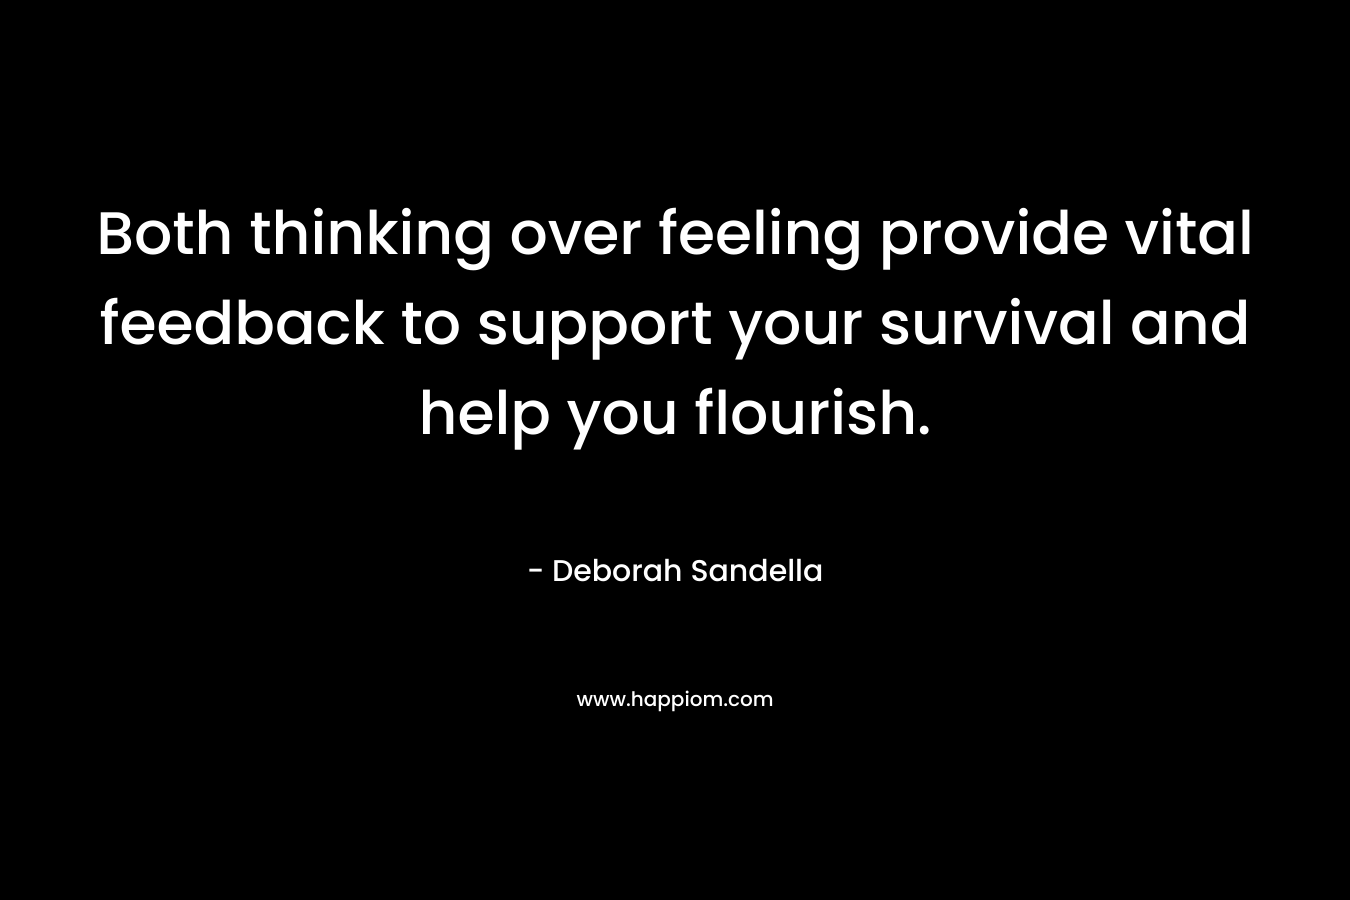 Both thinking over feeling provide vital feedback to support your survival and help you flourish. – Deborah Sandella